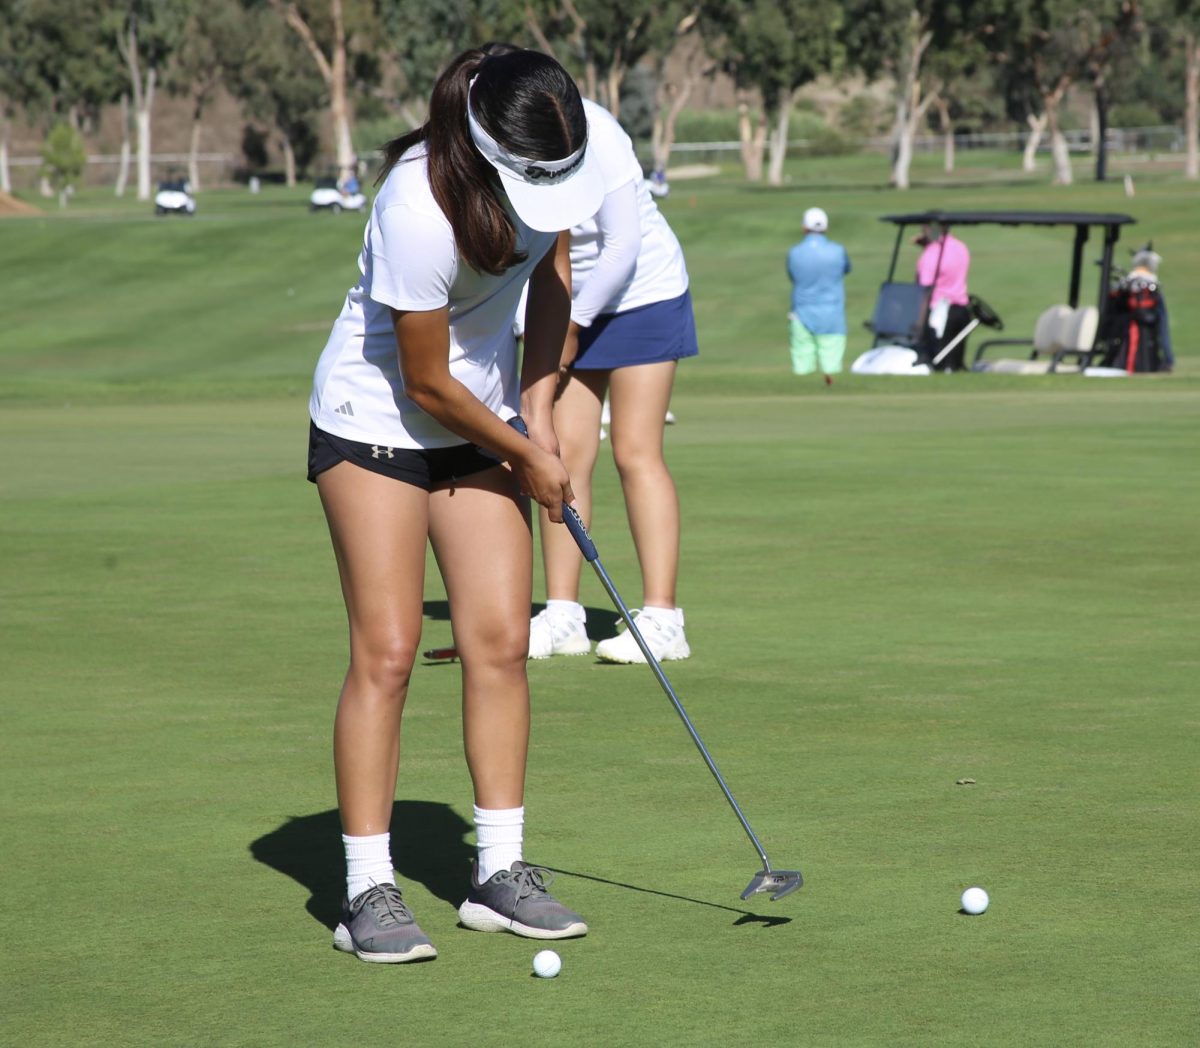 On Sep.18, Bonita Vista High (BVH) varsity girls golf player and sophomore, Andrea Roman putts the golf ball into the hole, helping BVH in their match against Mater Dei High. Head varsity girls golf coach Tony Valdez focuses on the girls short game in training, which helps Roman in this moment.

Provided by Alexis Acosta